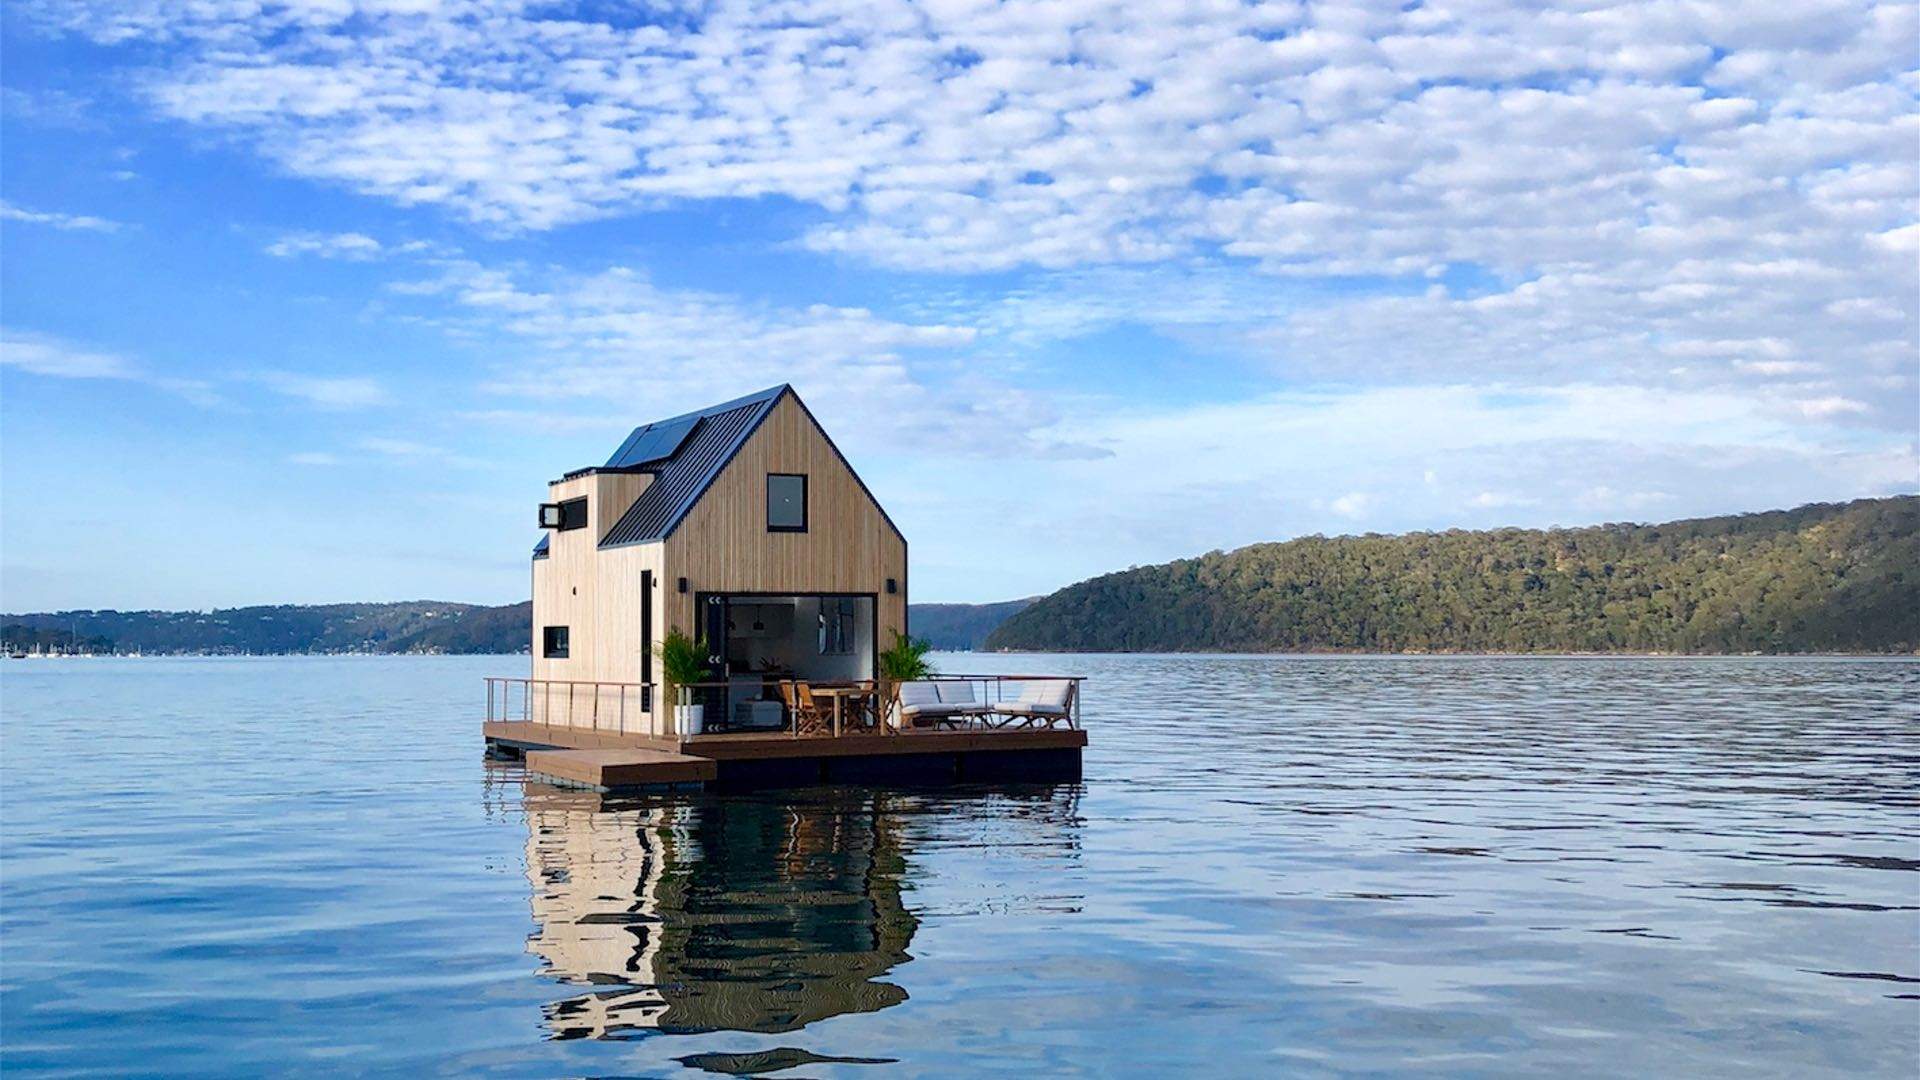 Lilypad Is the Northern Beaches' New Members-Only Luxury Floating Villa